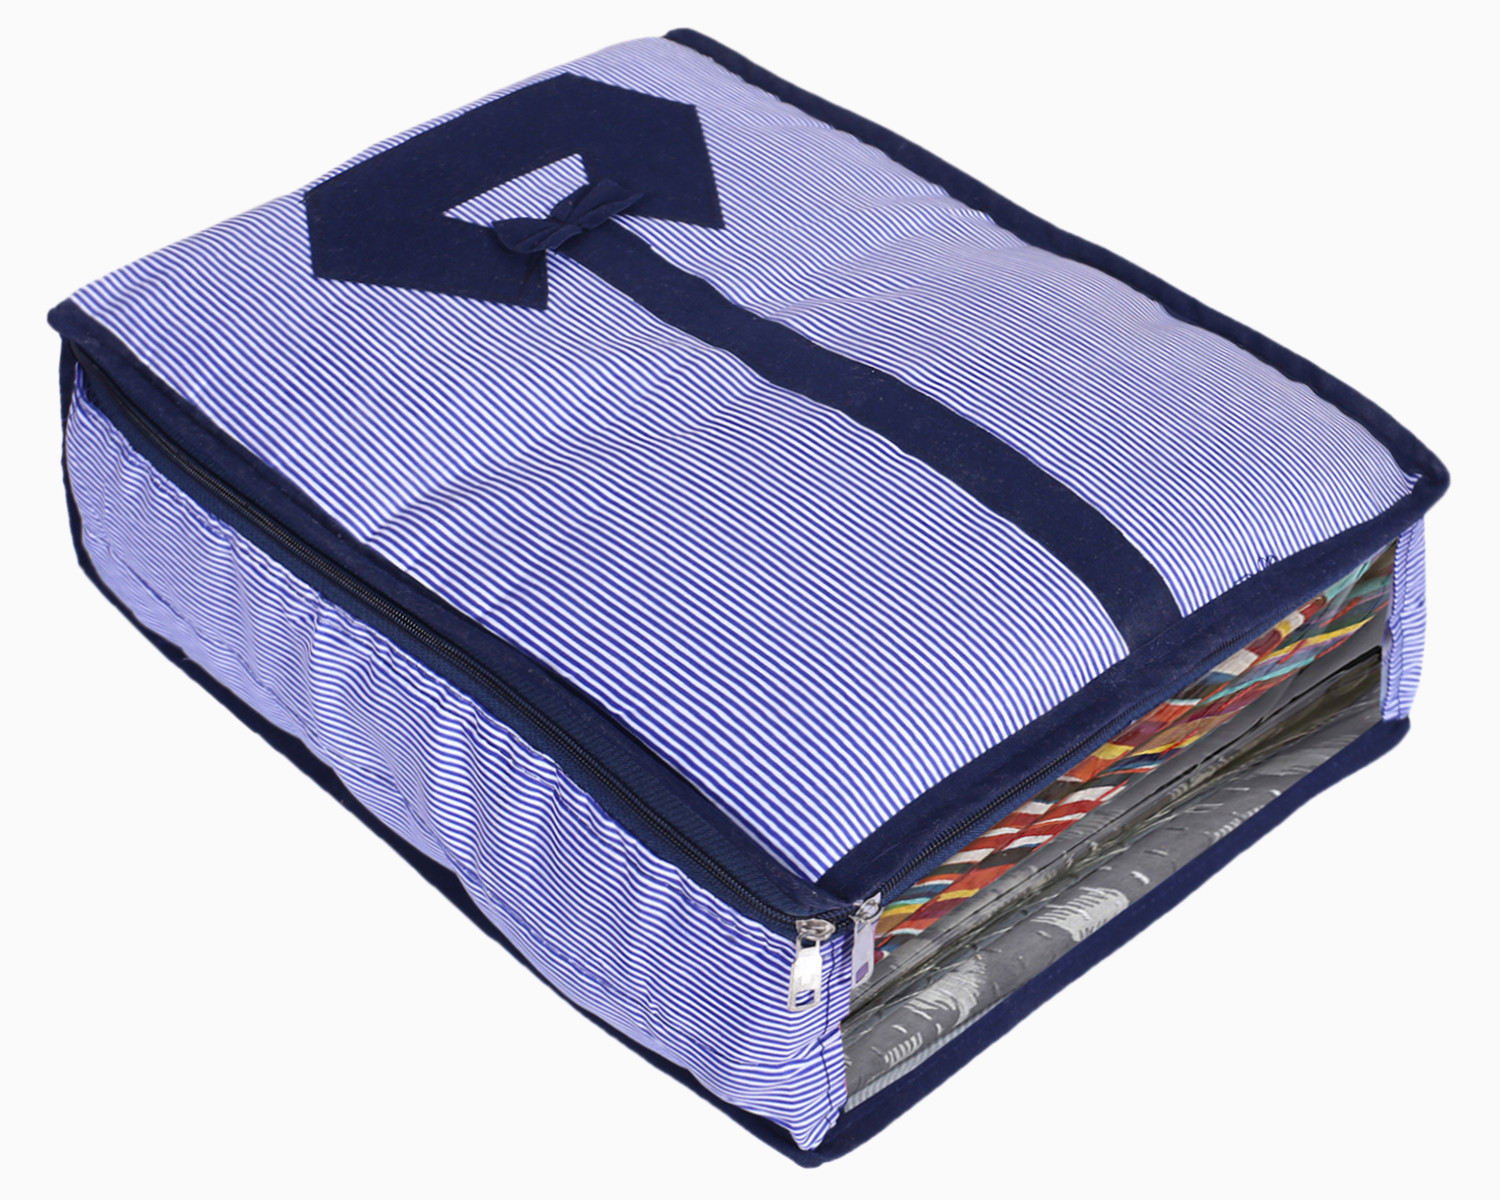 Kuber Industries Lining Print Cotton Shirt Cover/Clothing Organizer/Wardrobe Organizer With Window For Home, Traveling (Blue)